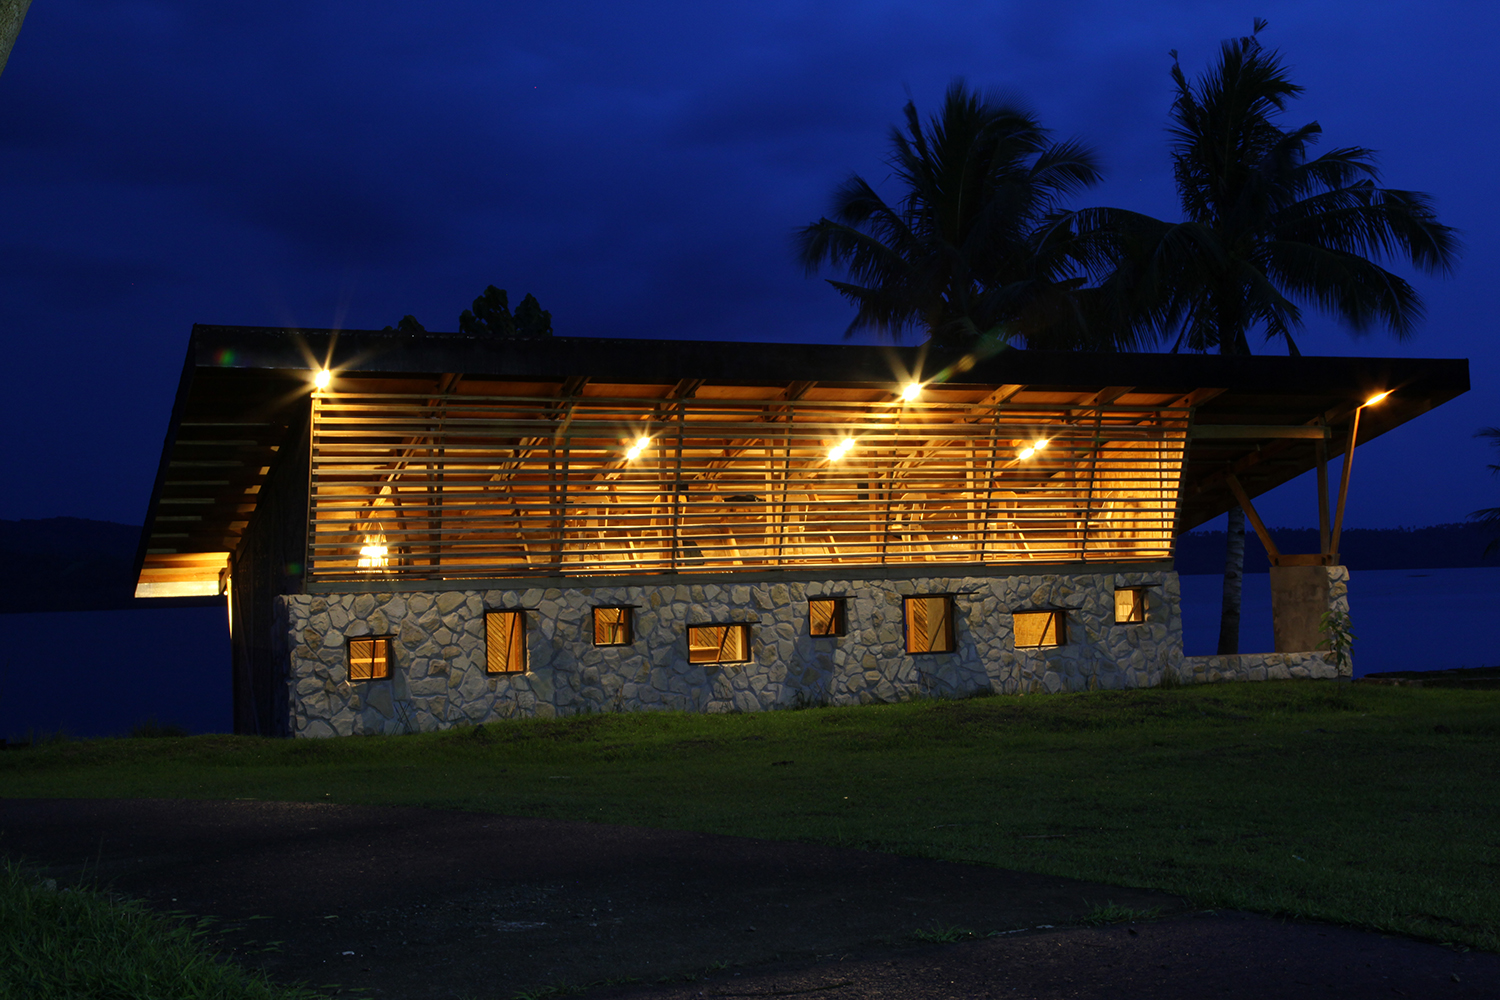 The study centre during night time